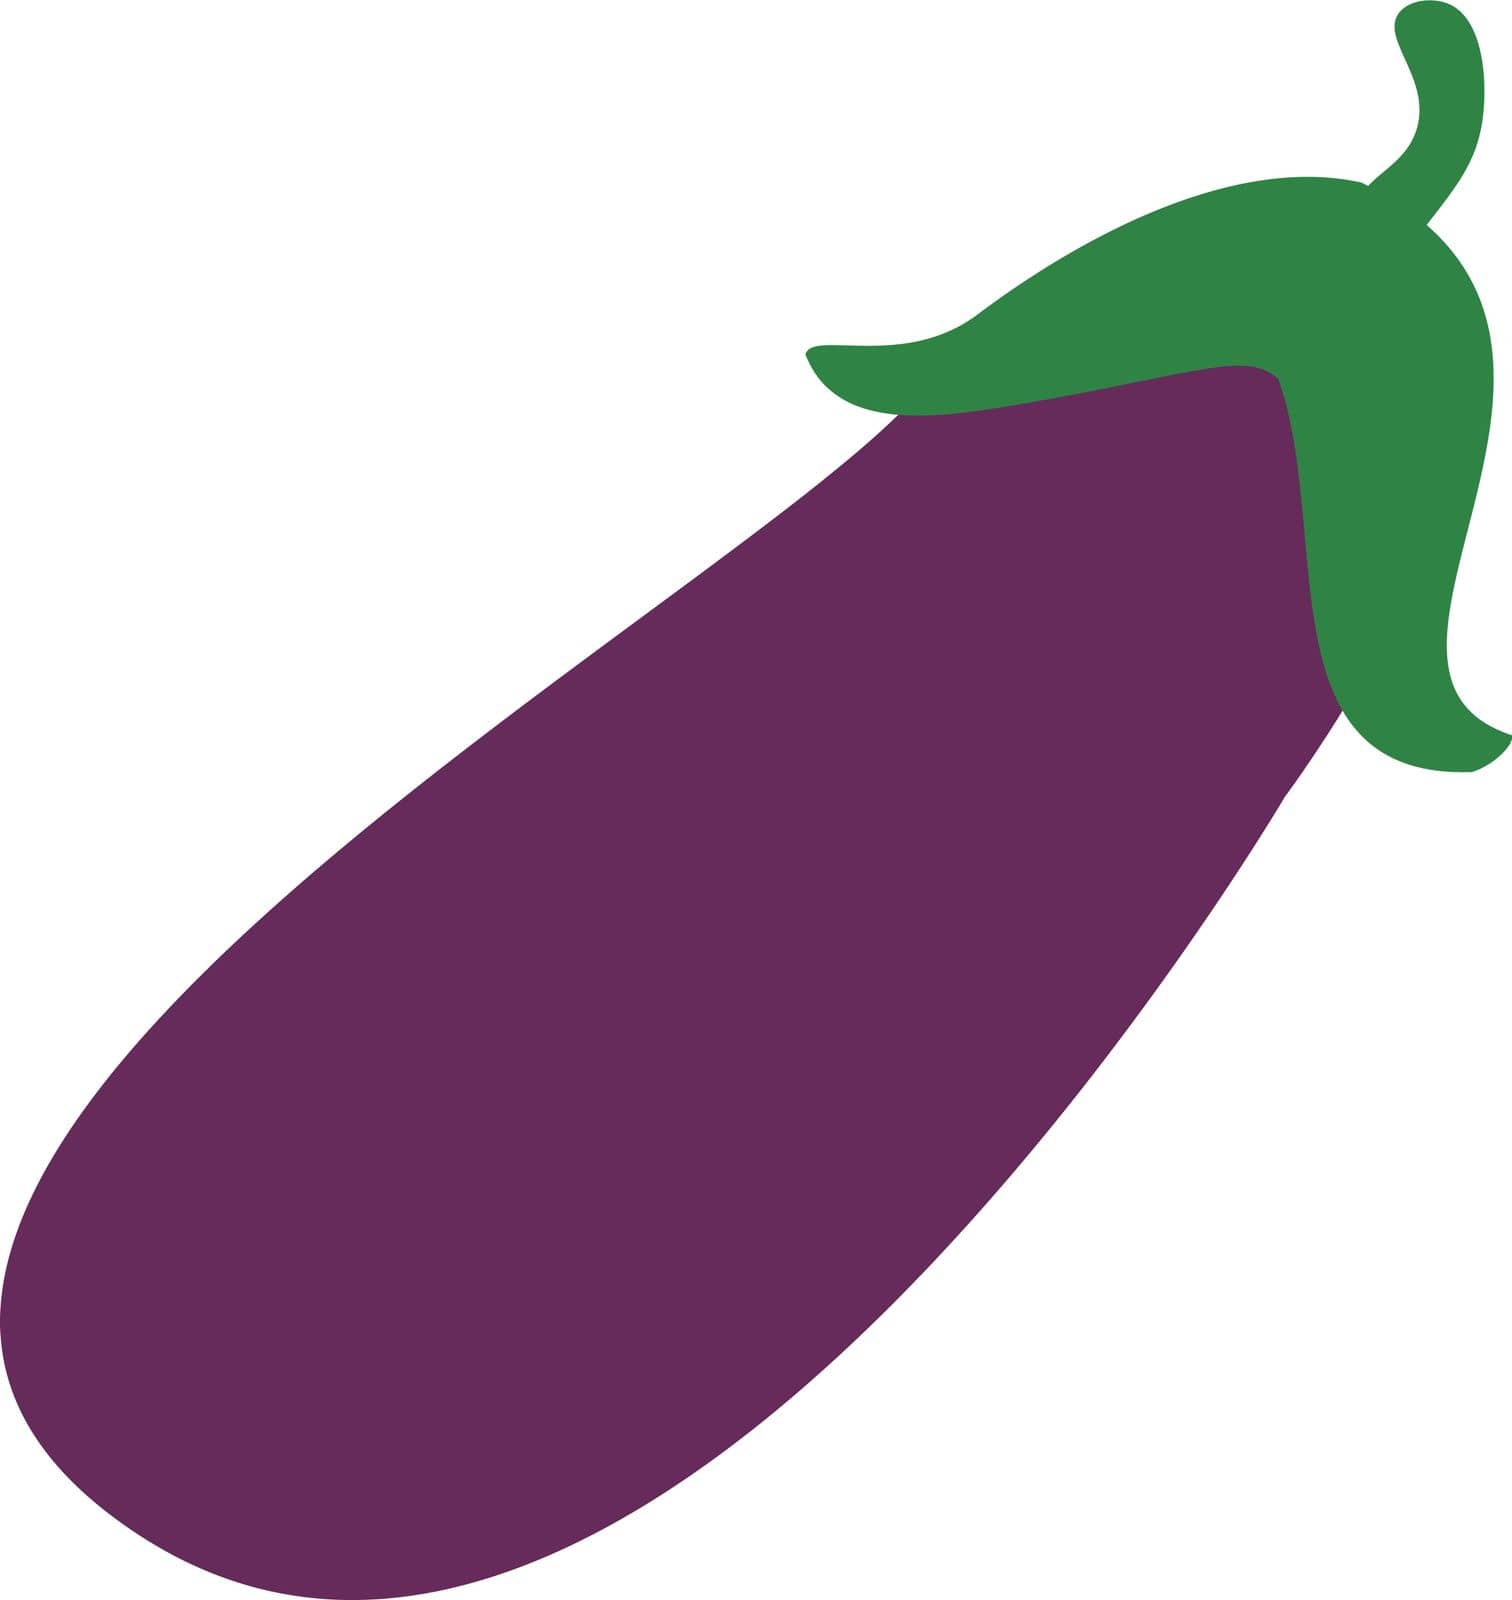 Eggplant, vector. Purple eggplant with green tops. Can be used as a logo, icon.